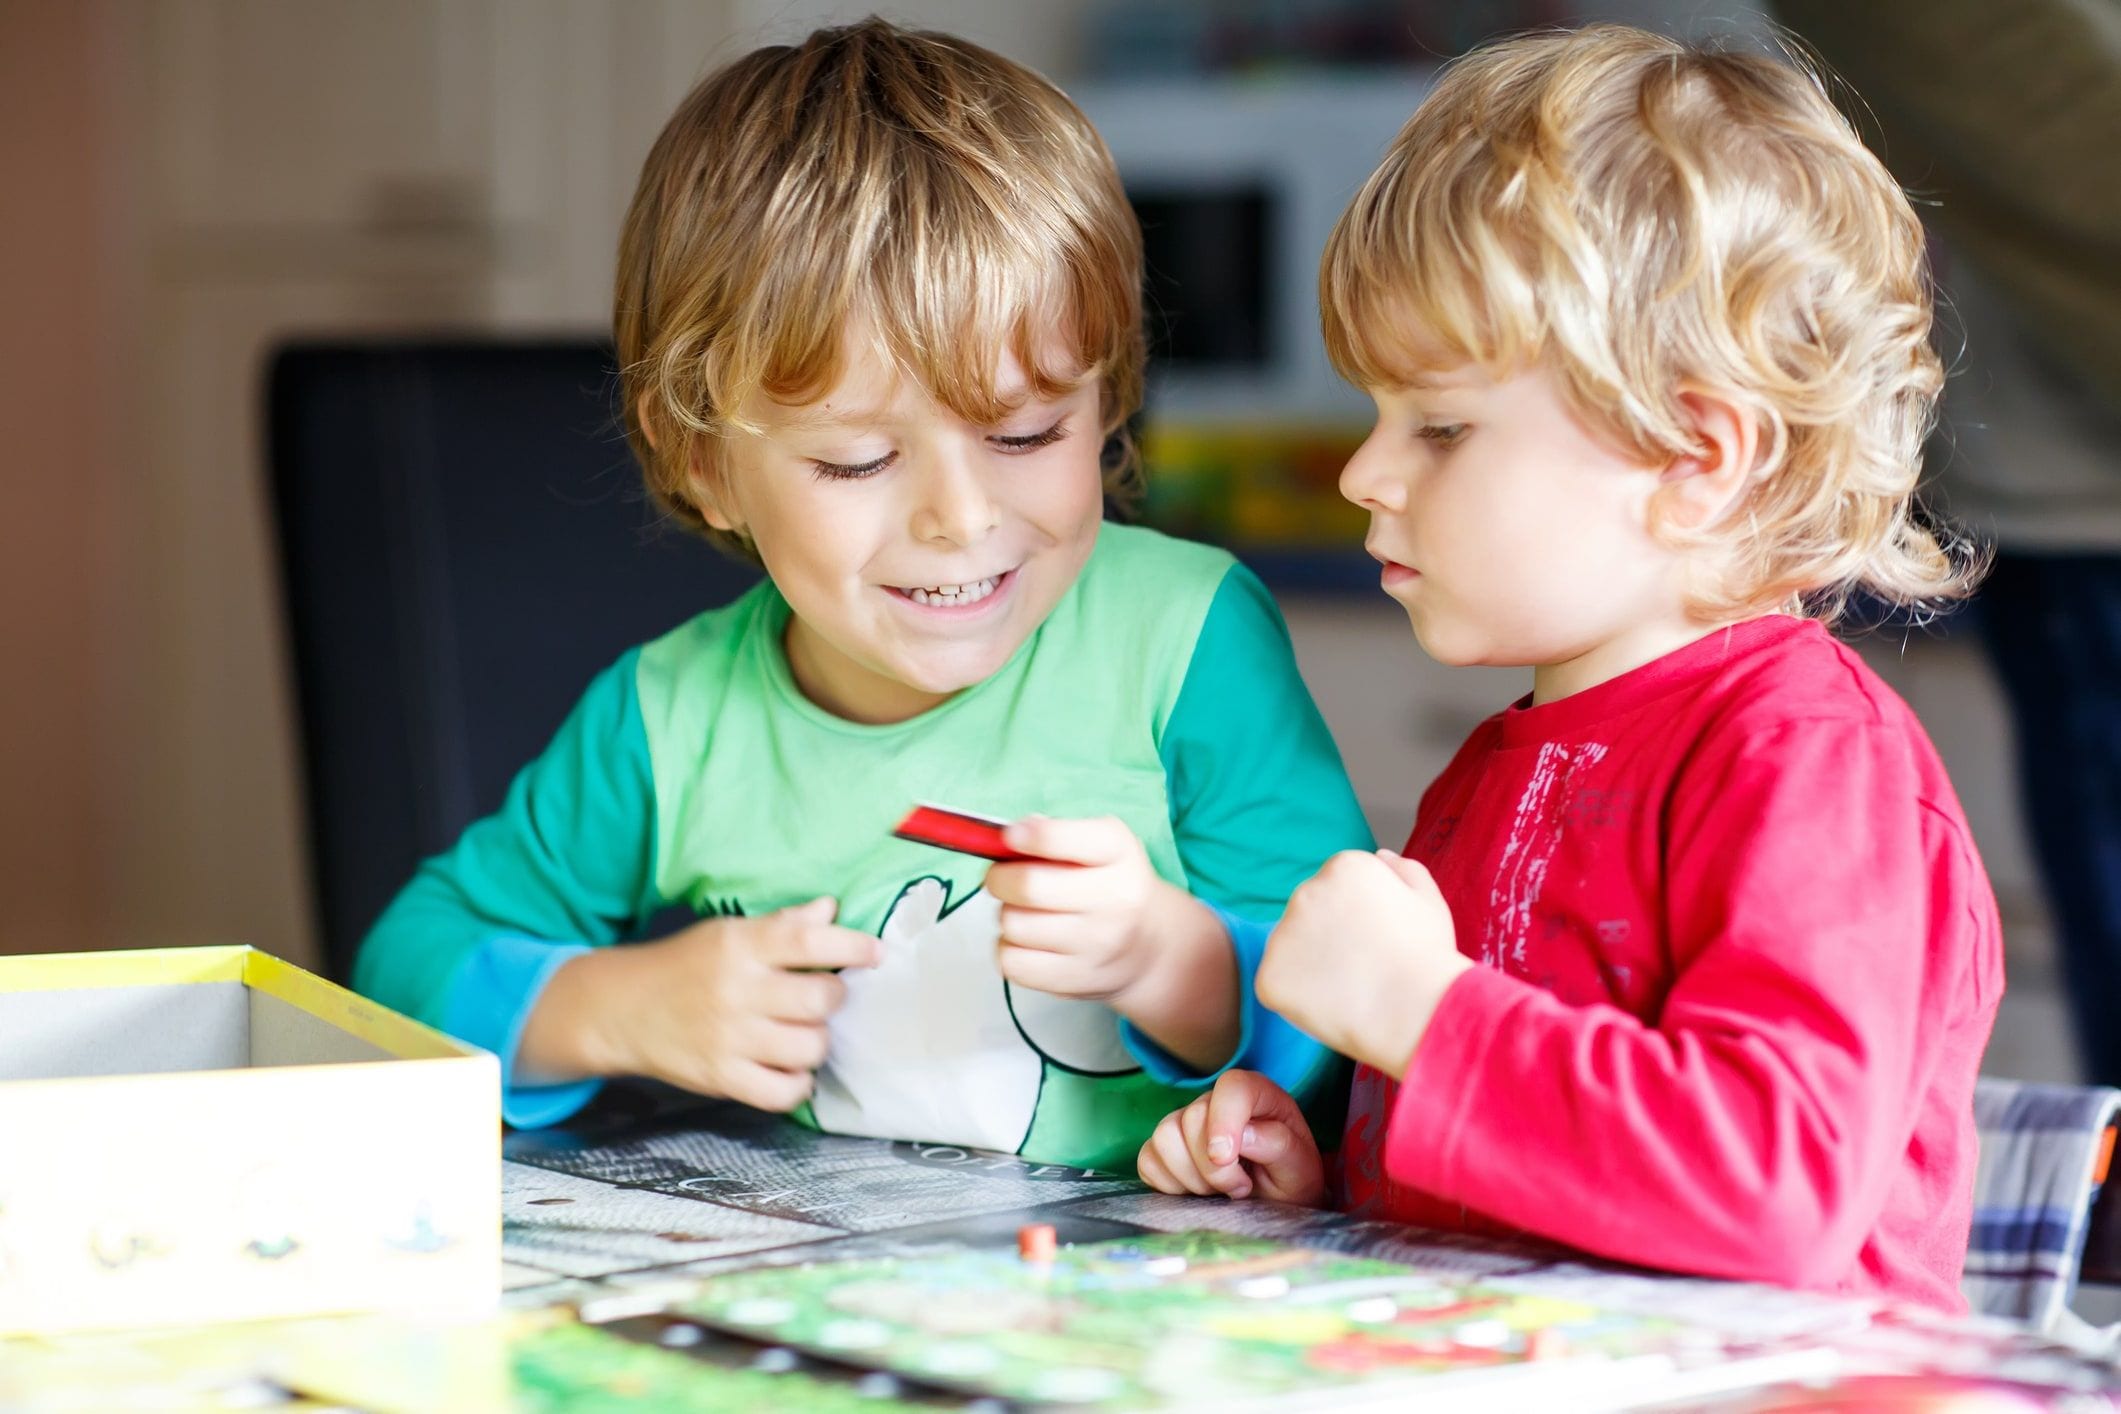 15-games-for-3-year-olds-to-play-with-others-care-resources